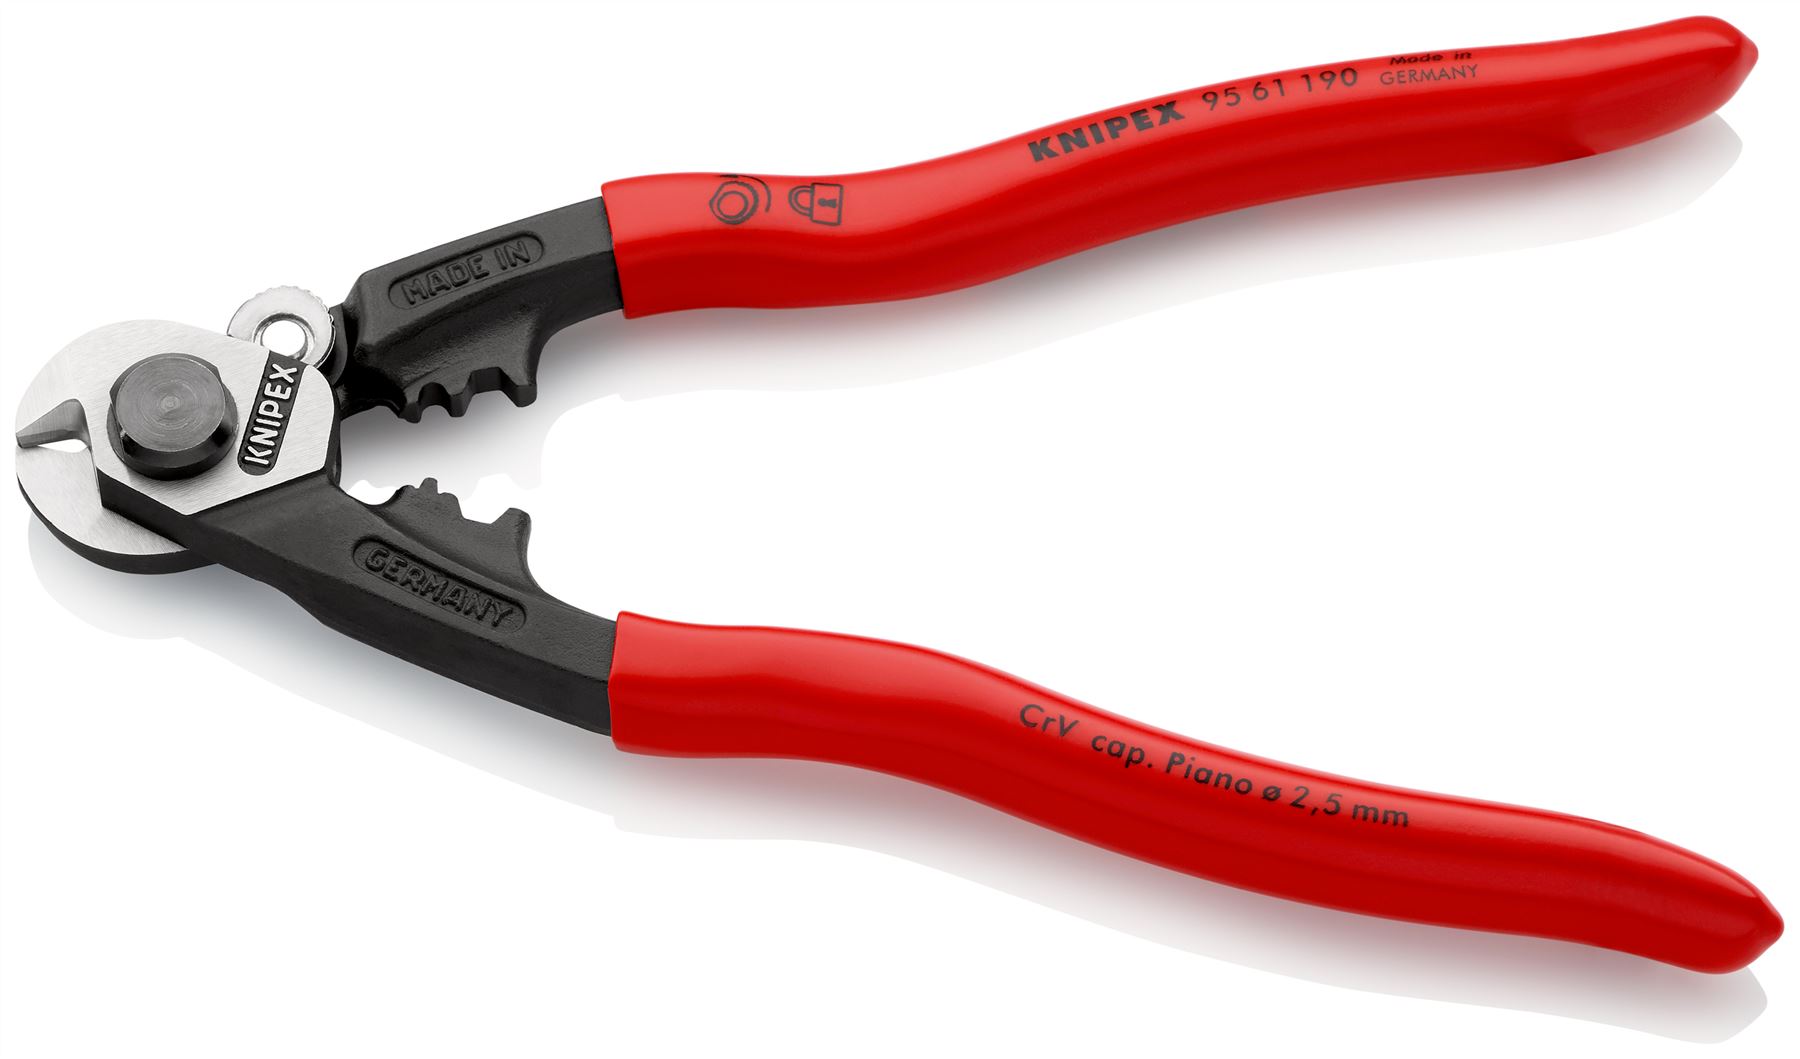 KNIPEX Wire Rope Cutter Forged 190mm Plastic Coated Handles 95 61 190 SB